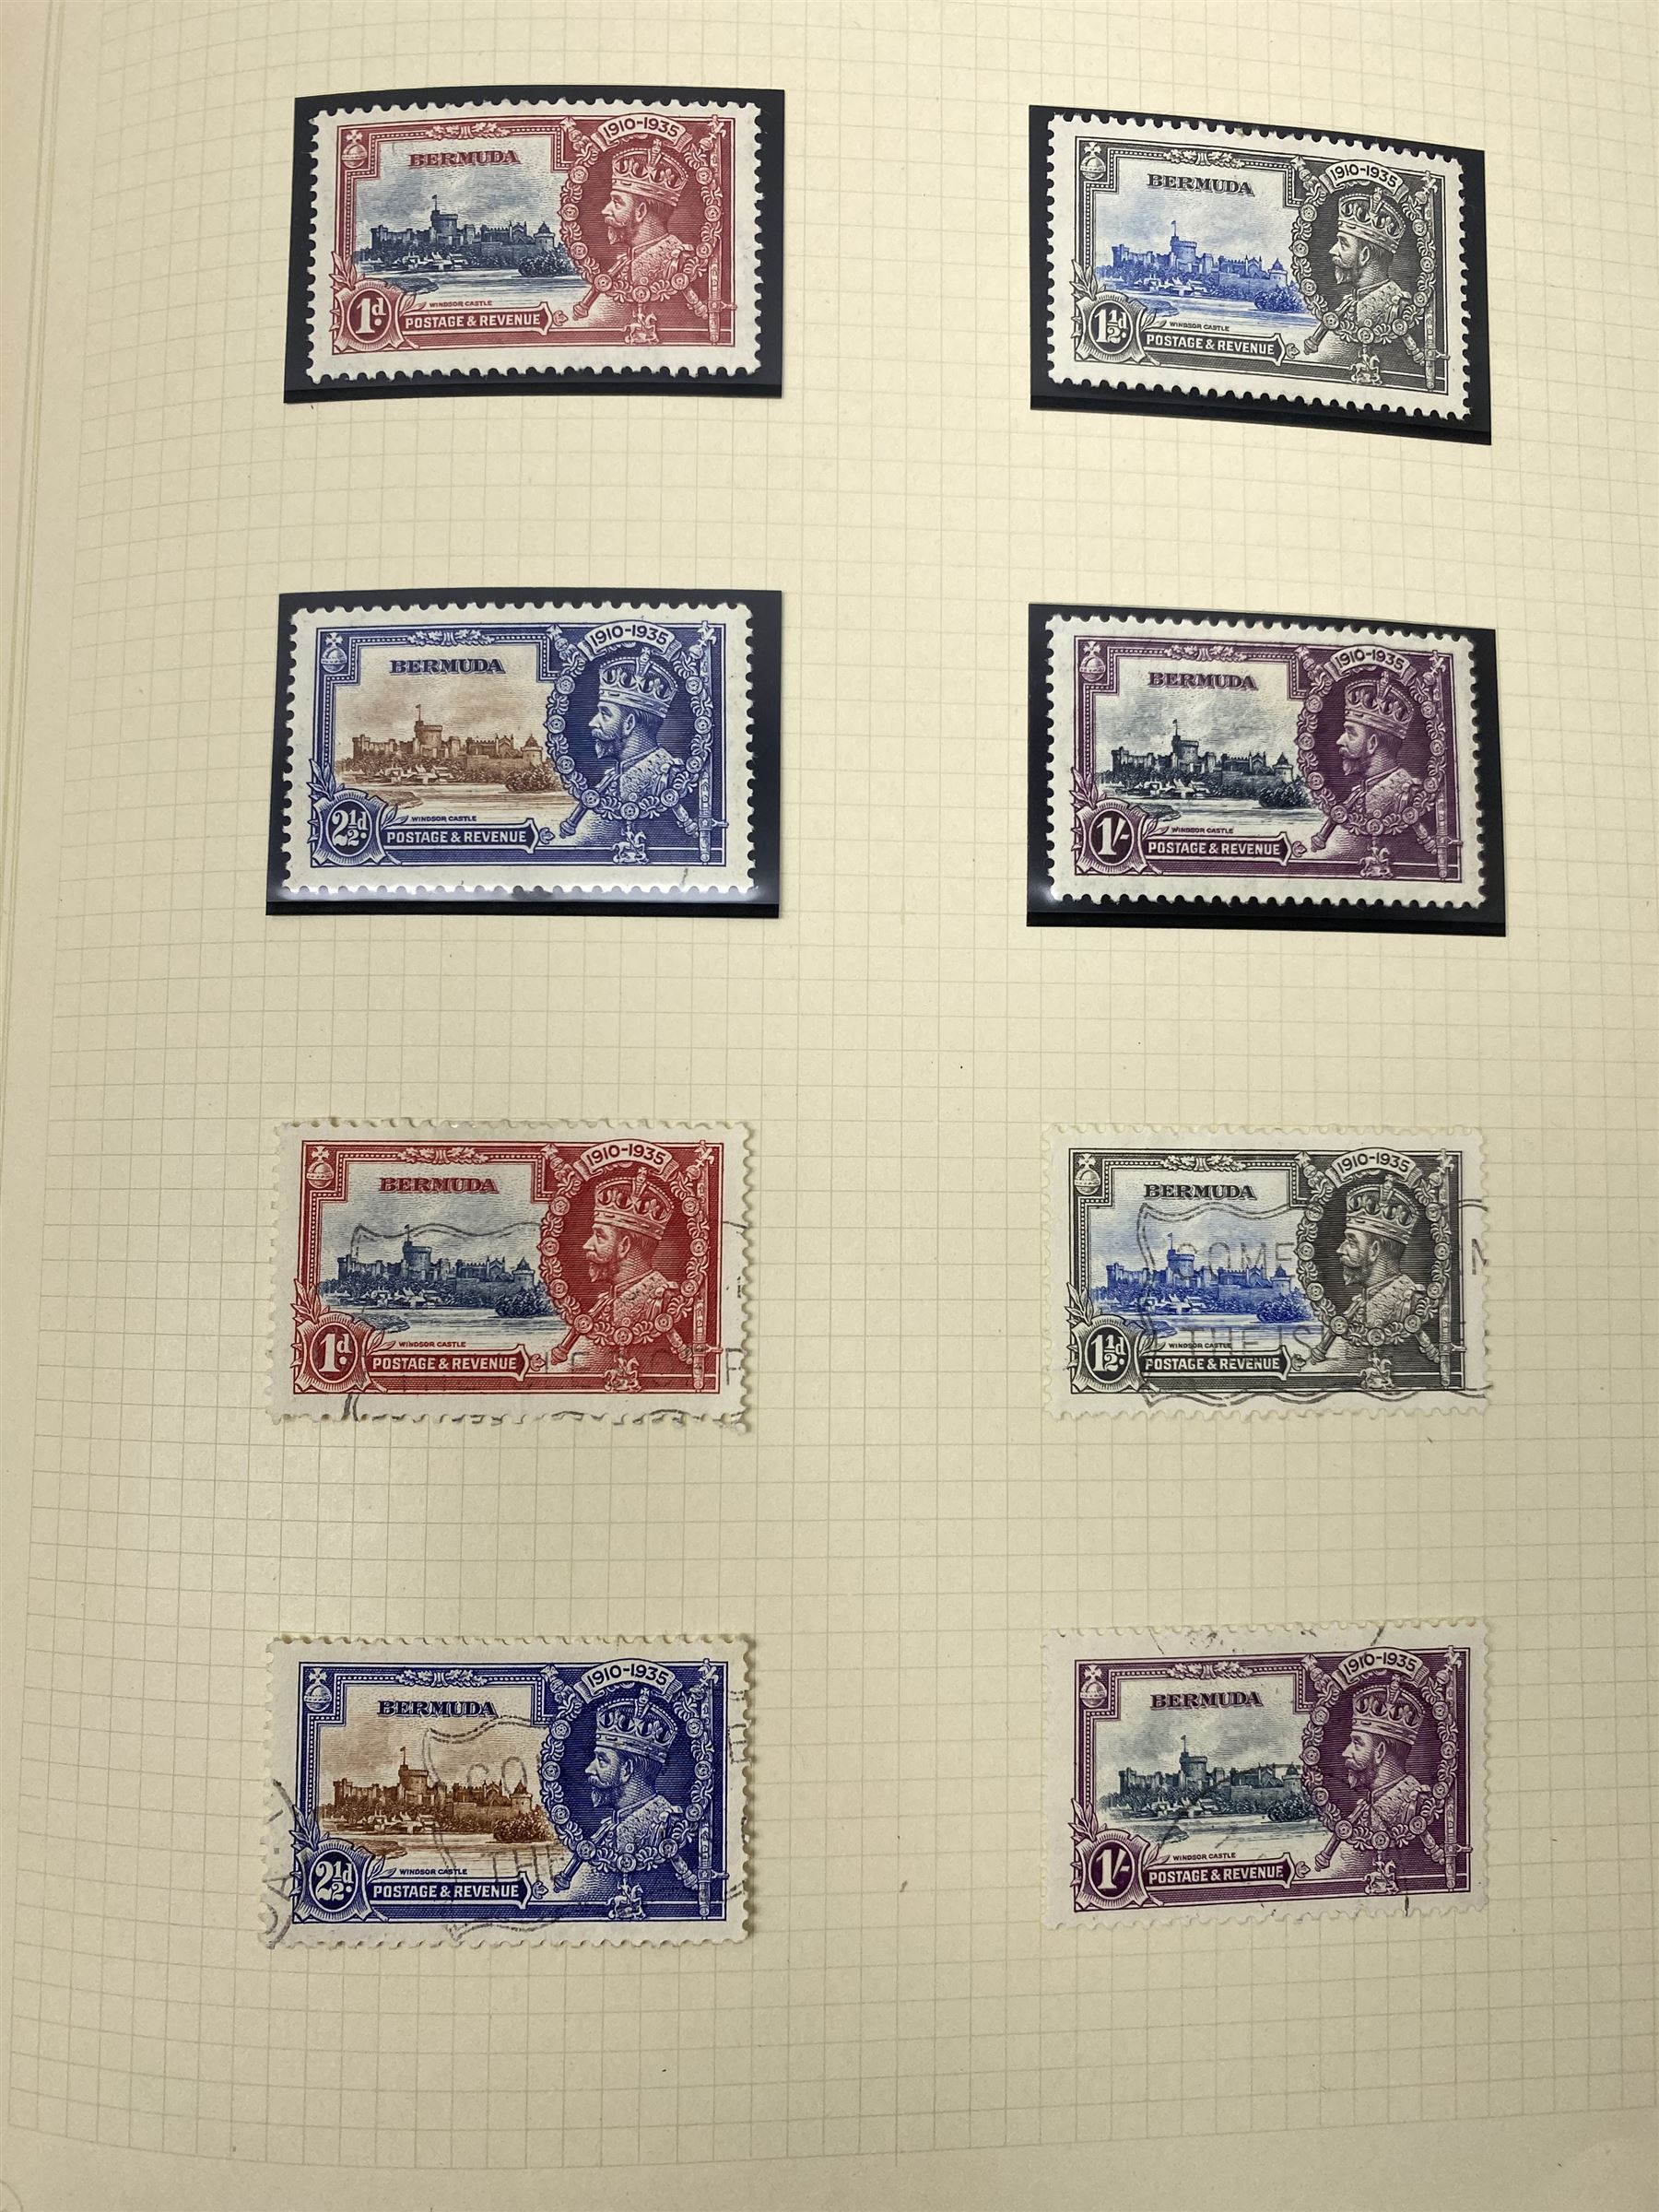 King George V 1935 Silver Jubilee stamps - Image 11 of 17